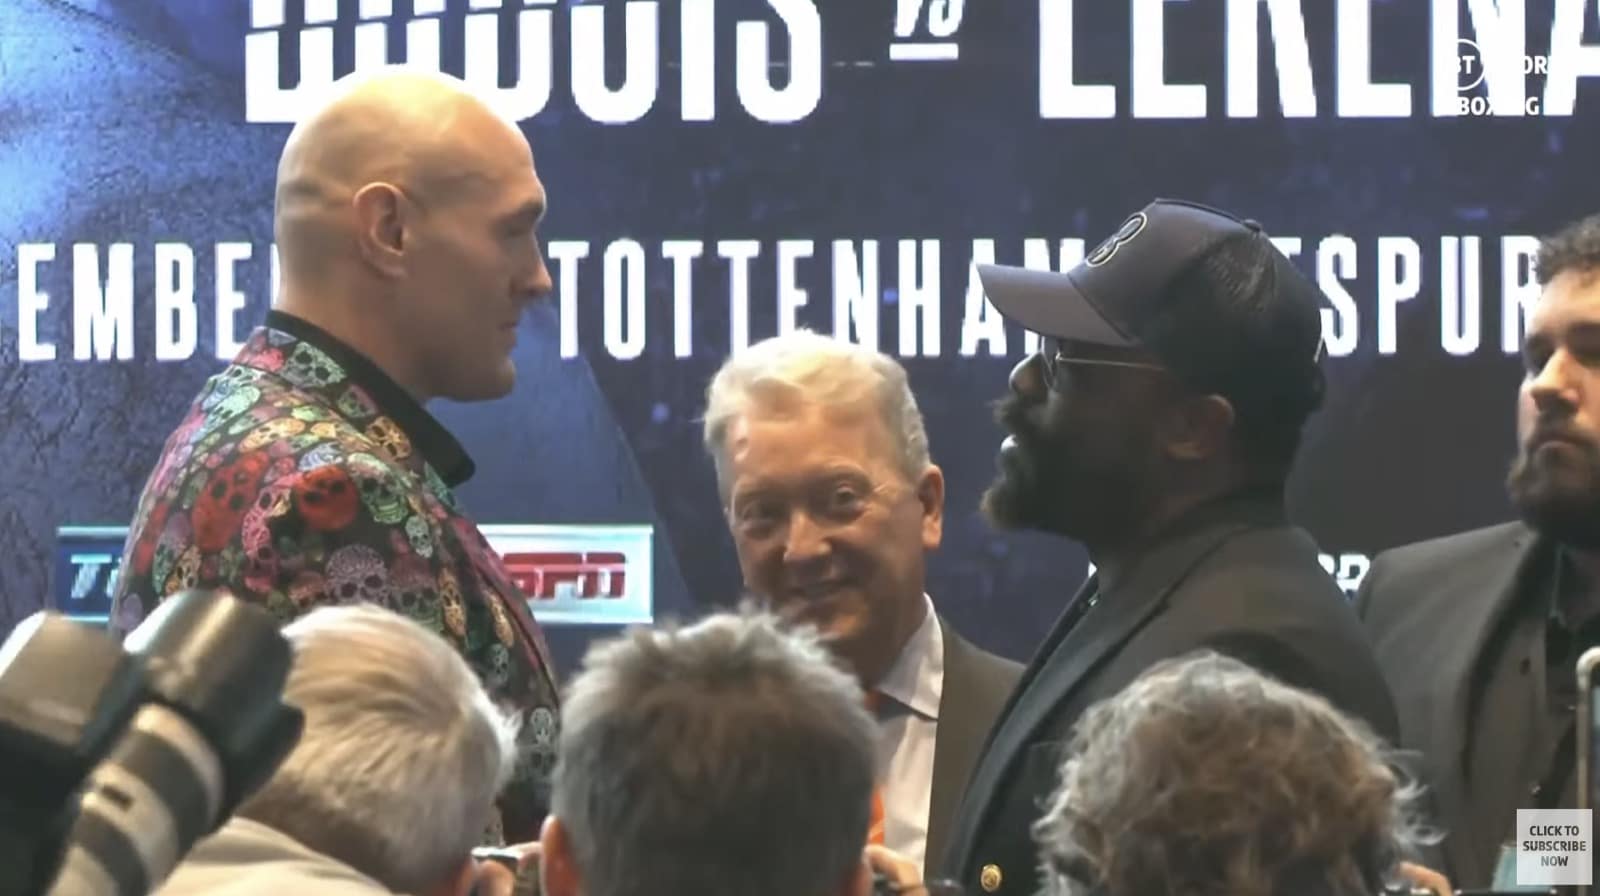 Tyson Fury predicts sellout in 1 day for Derek Chisora trilogy on December 3rd